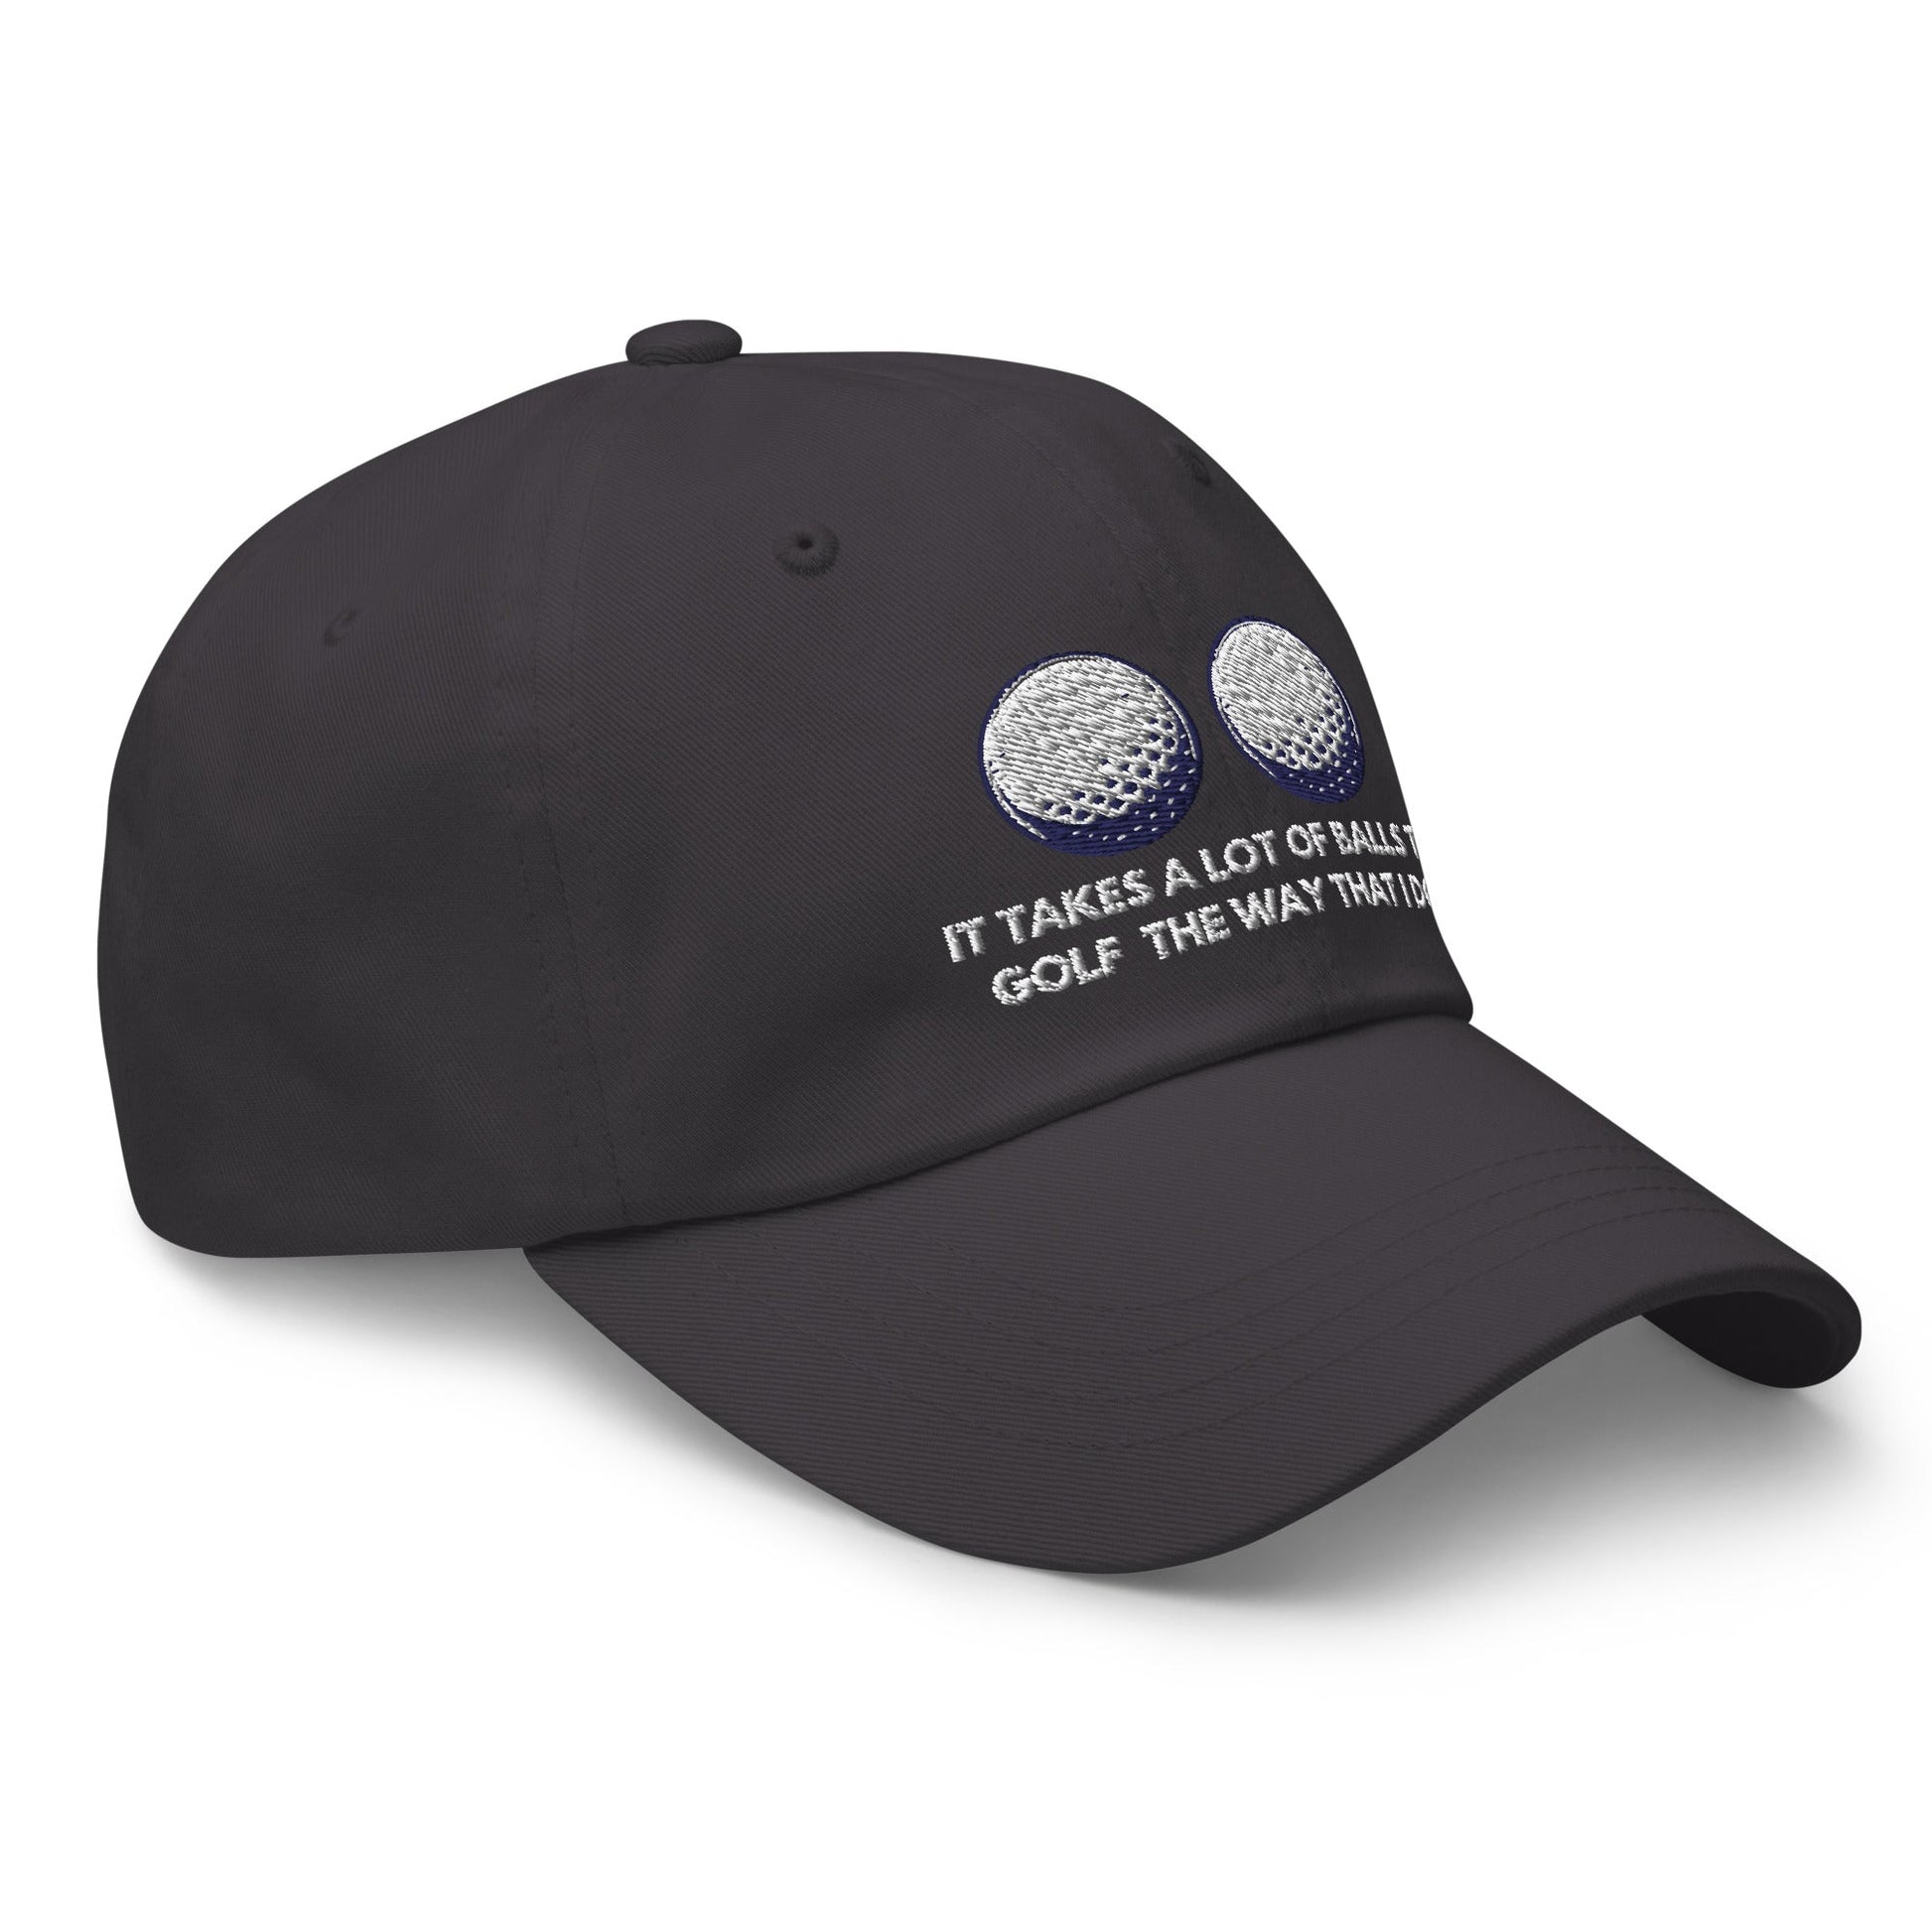 Funny Golfer Gifts  Dad Cap Dark Grey It Takes a lot of Balls to Golf the way that I Do Cap